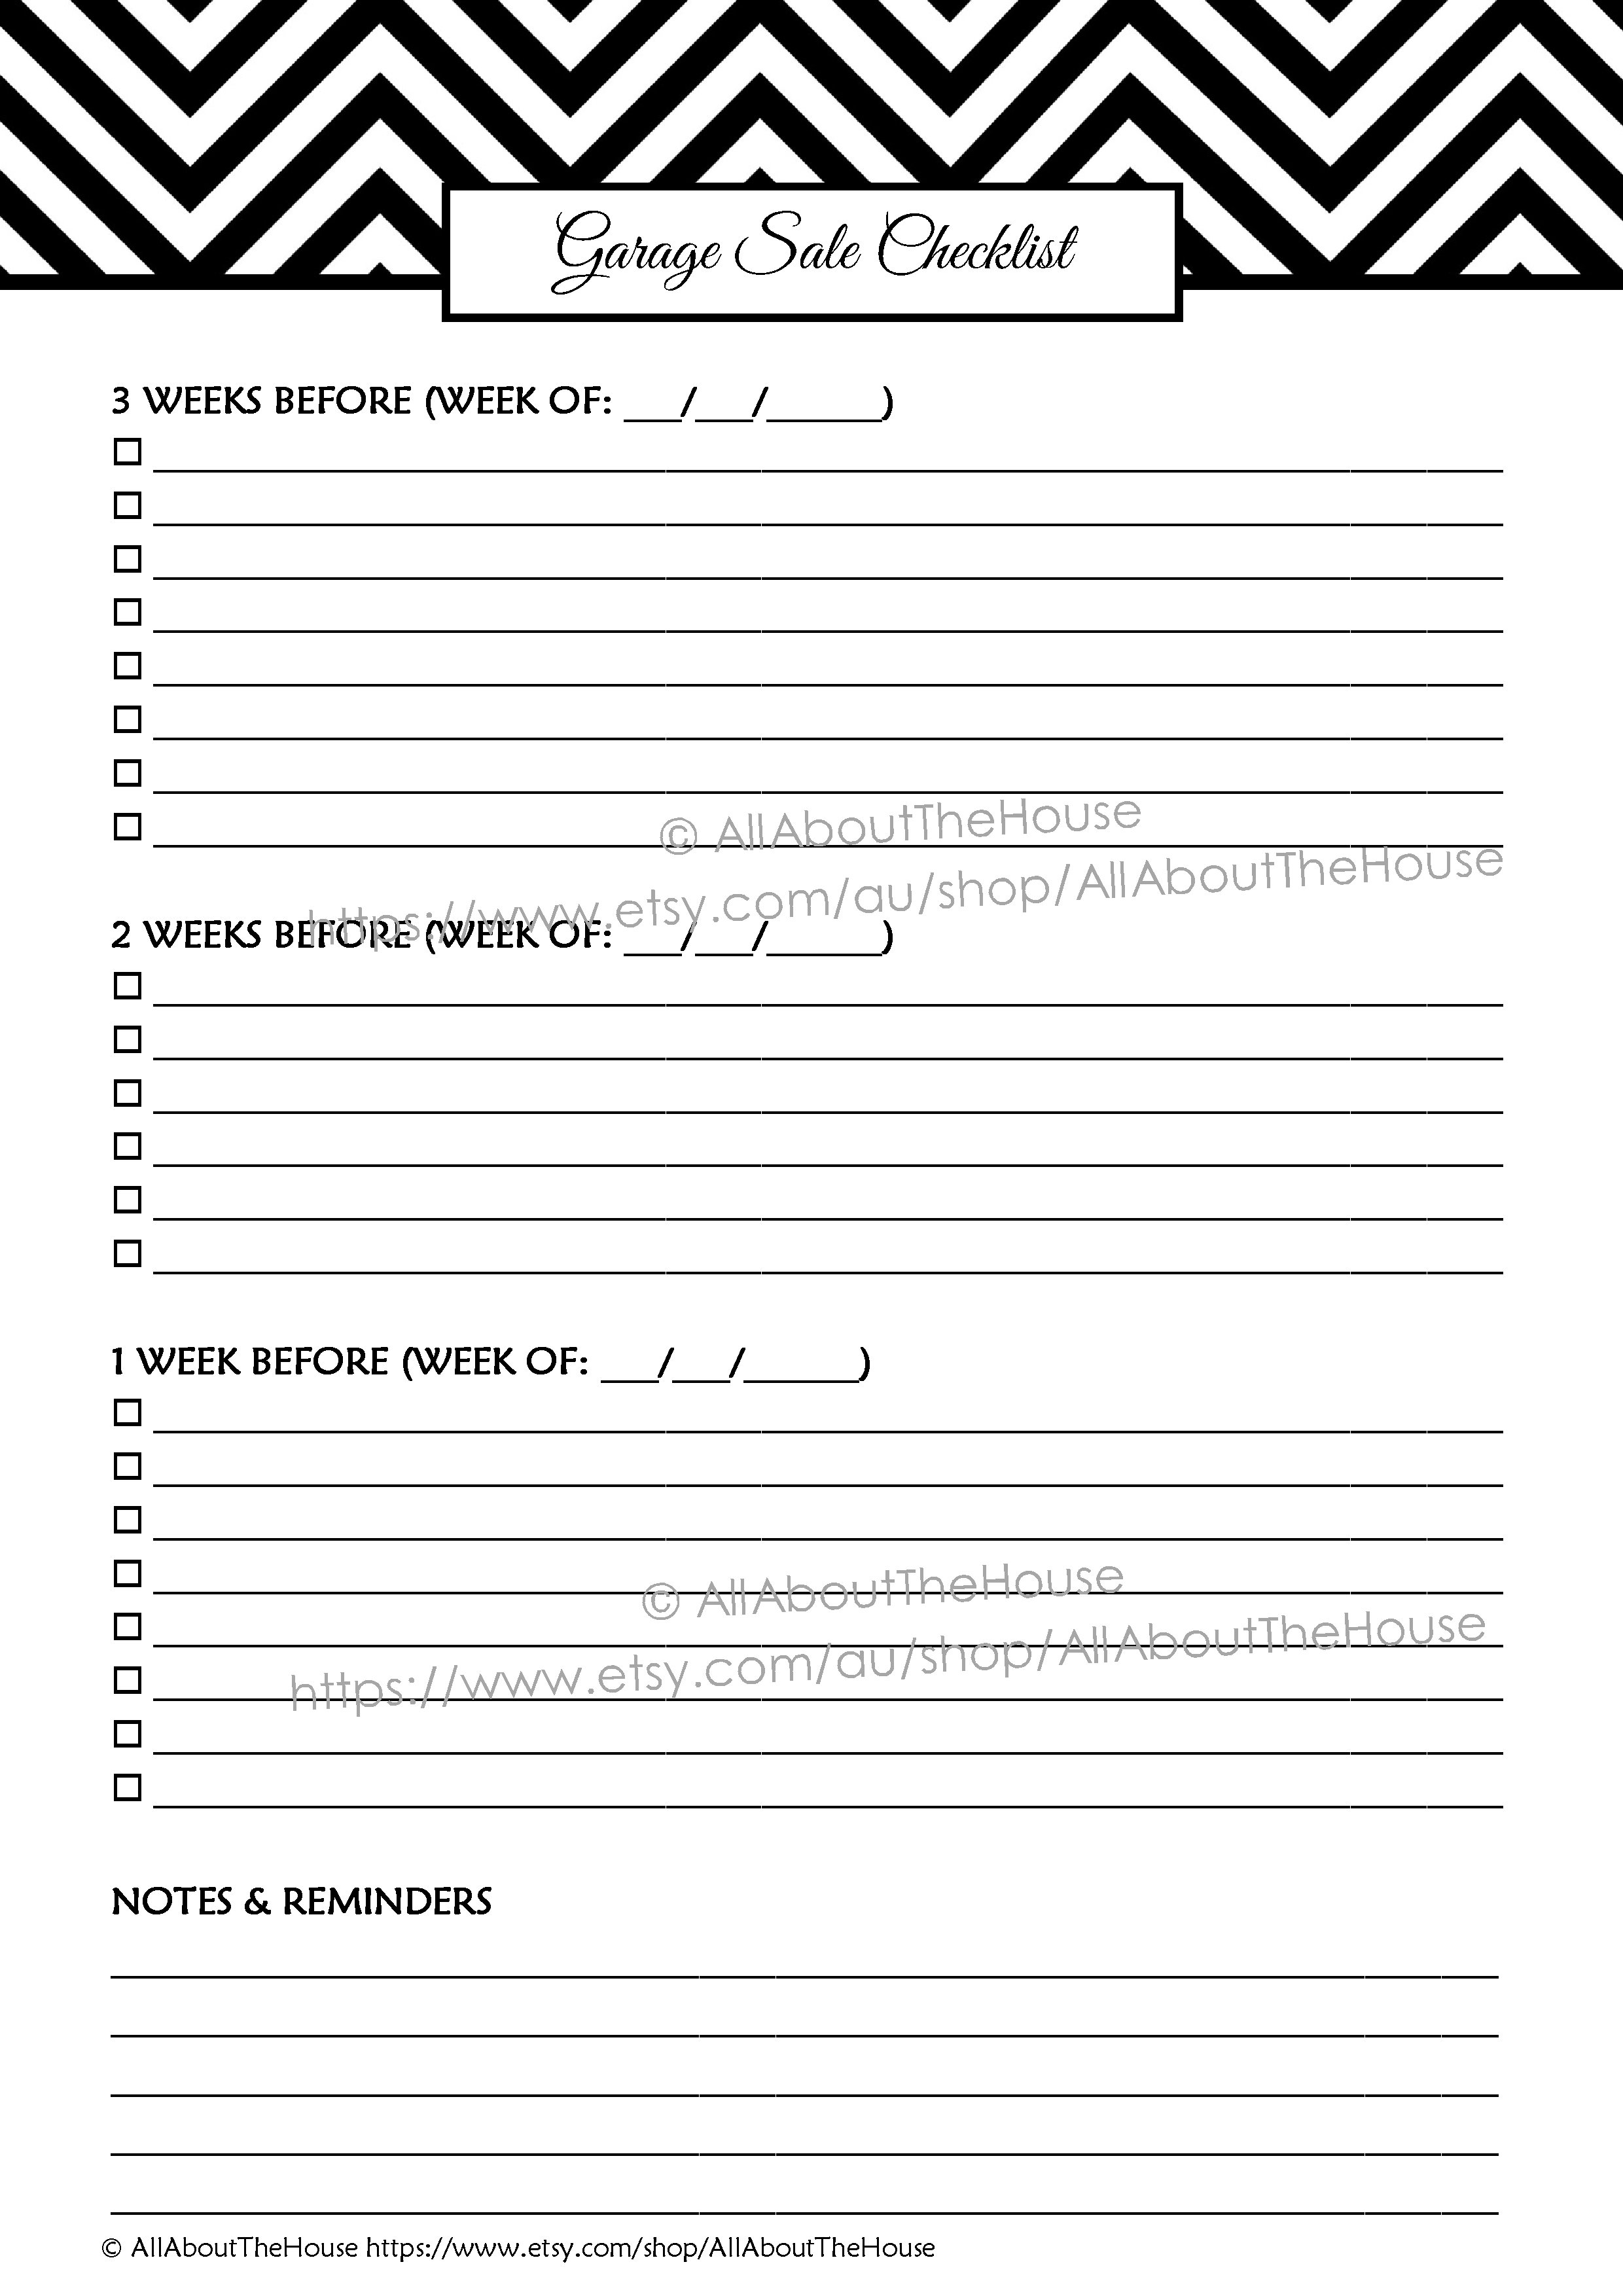 5 Best Images of Moving Checklist Planner Printable House Moving